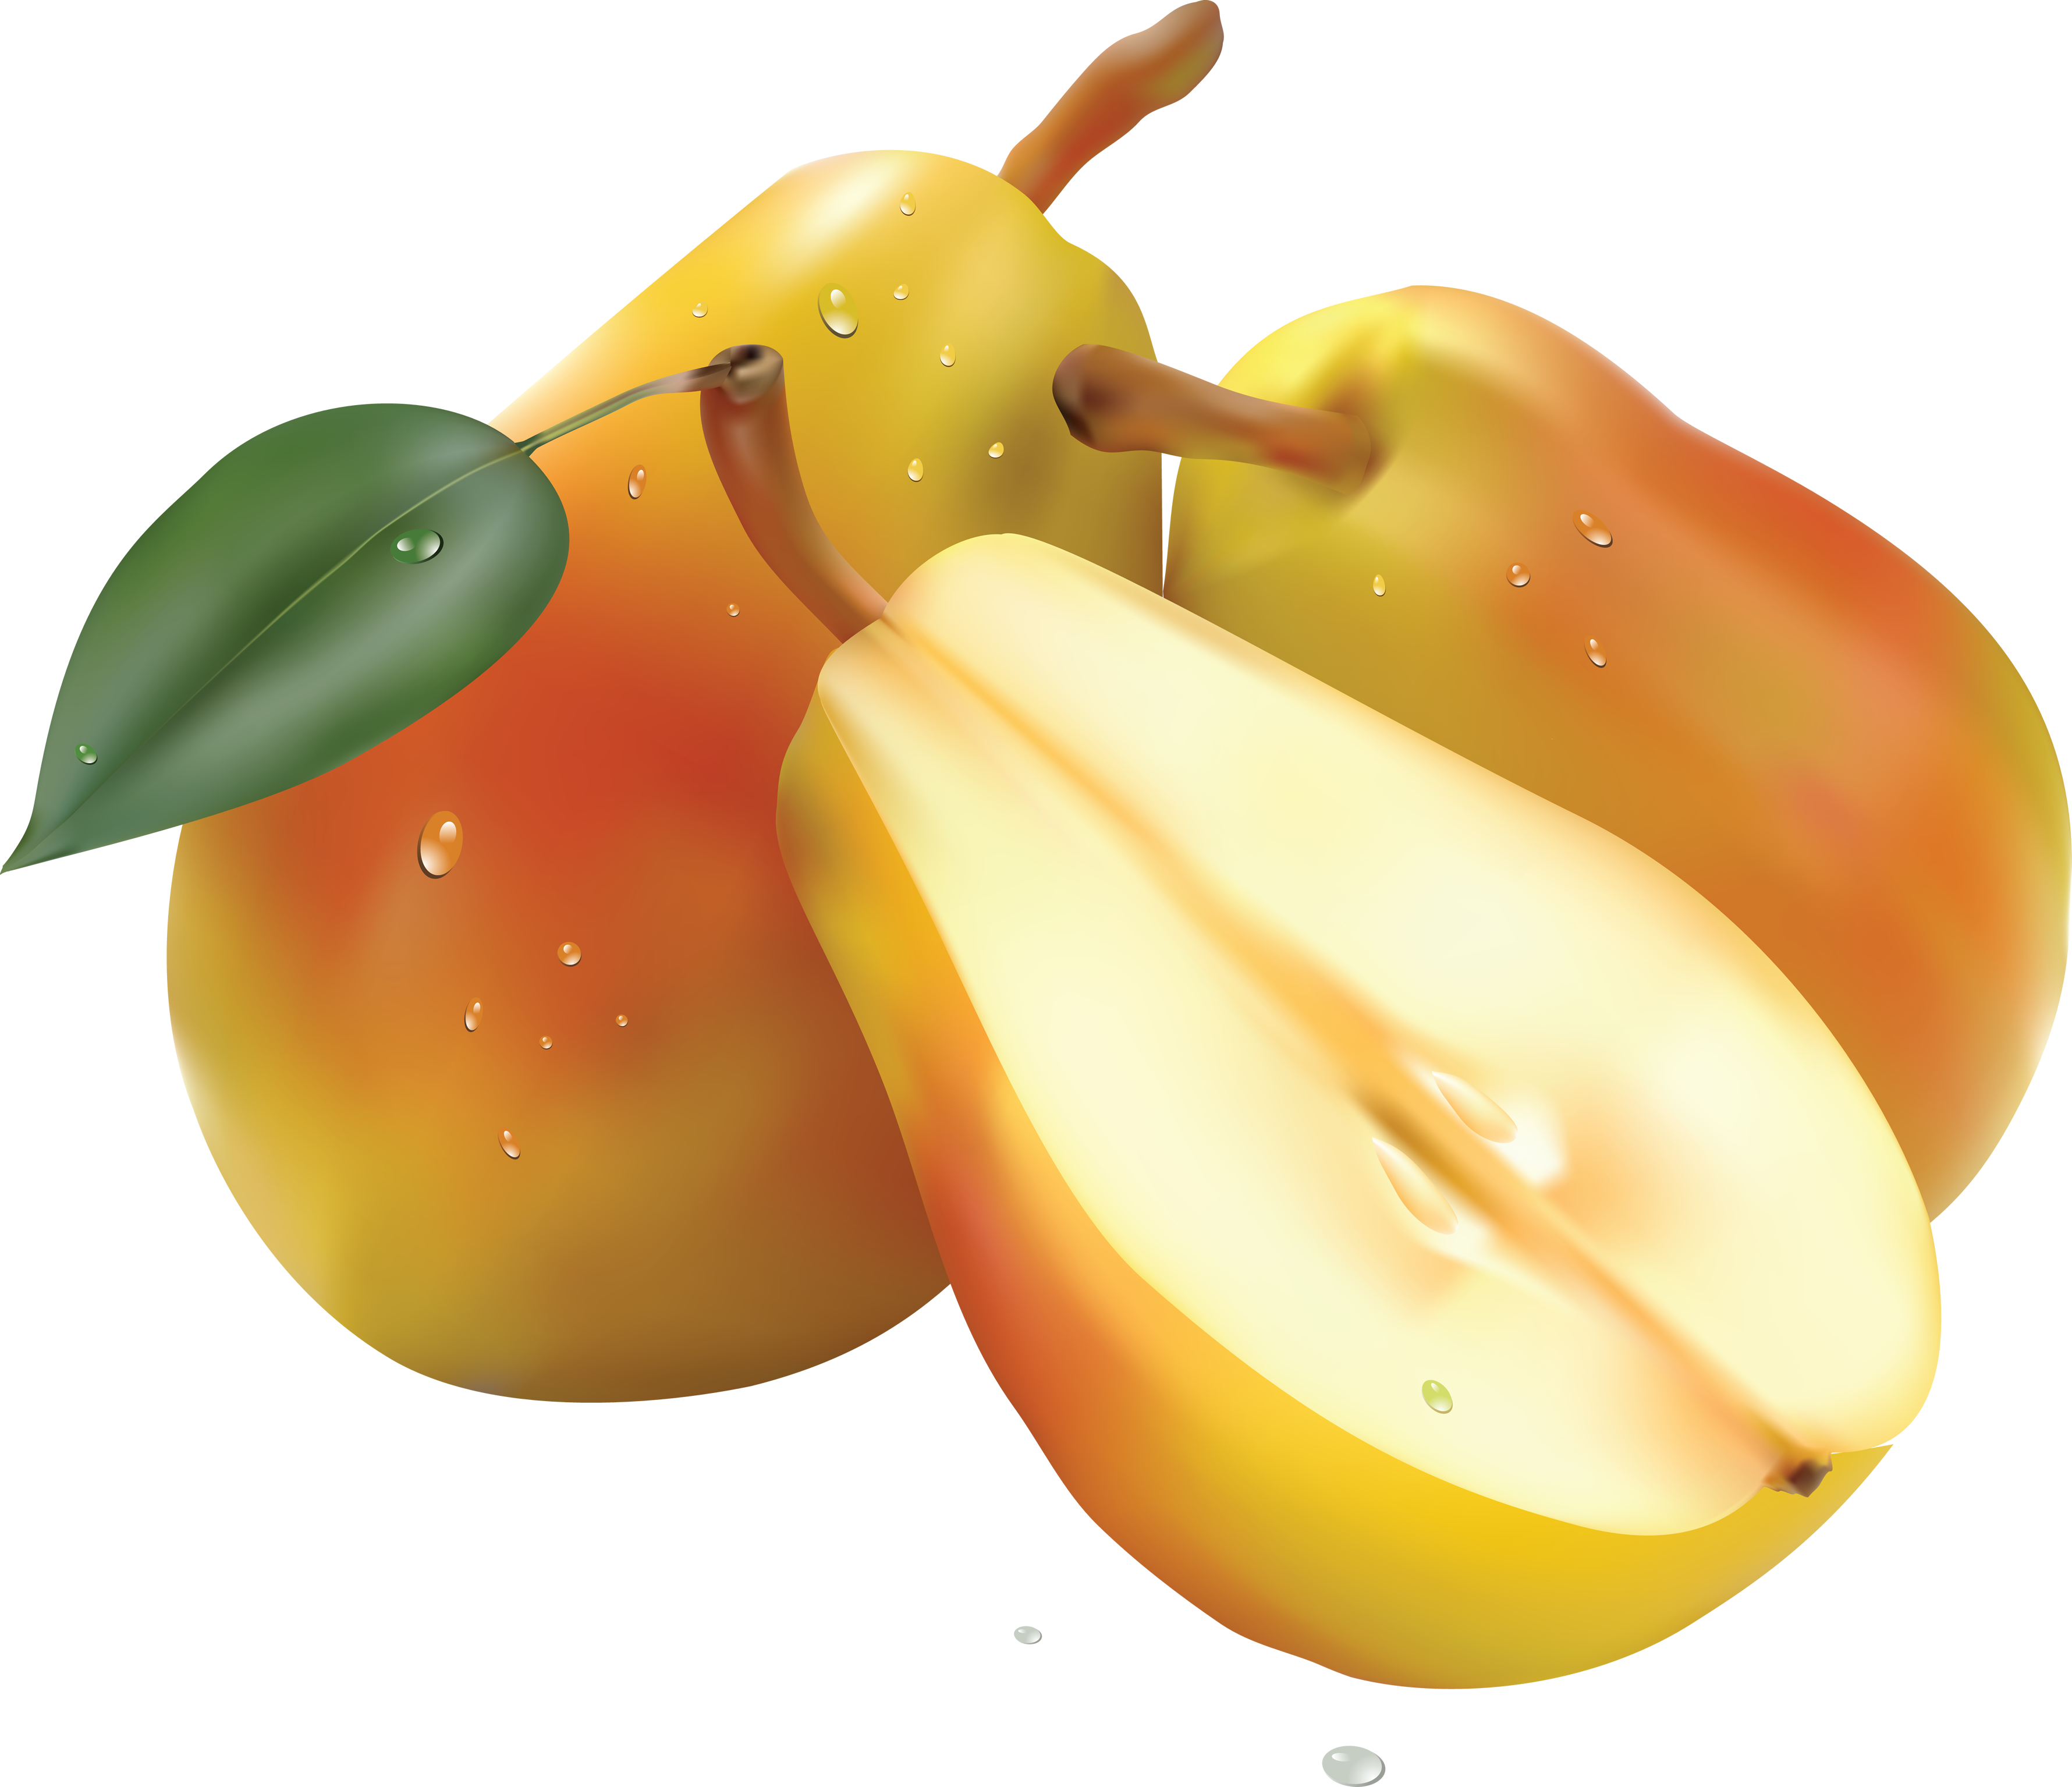 Pear Png Transparent Images #2388549 - Pear, Transparent background PNG HD thumbnail